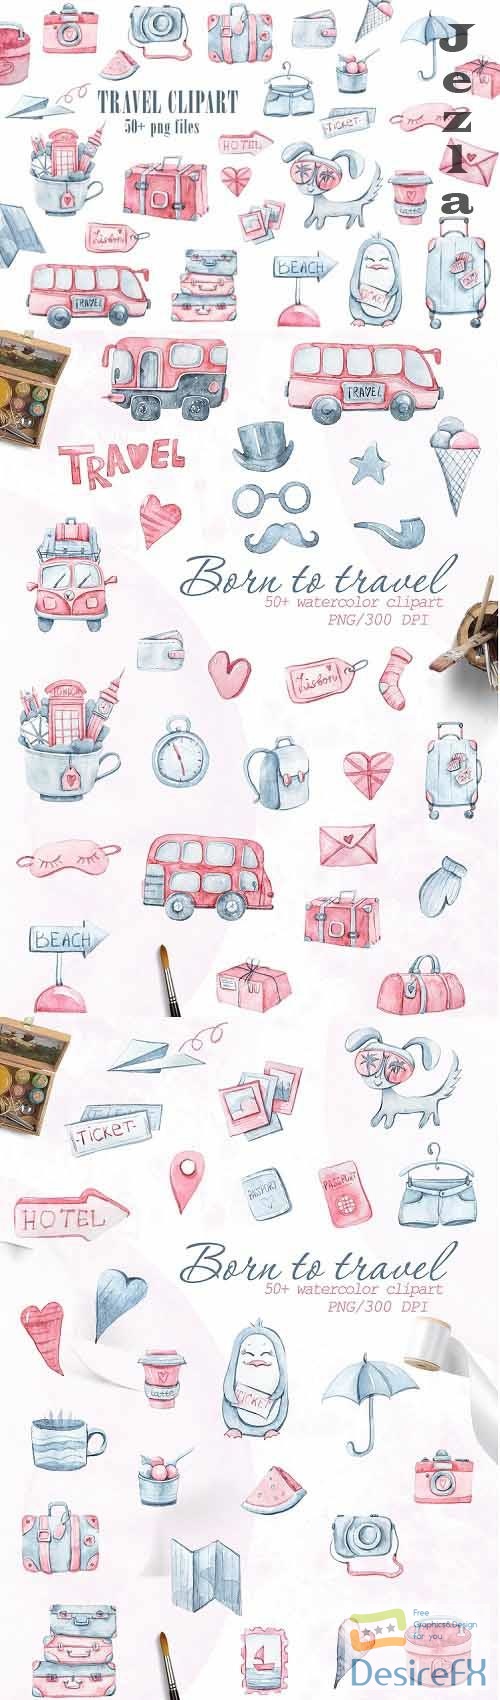 Watercolor travel clipart. Bags, cameras, tickets png files - 1179218